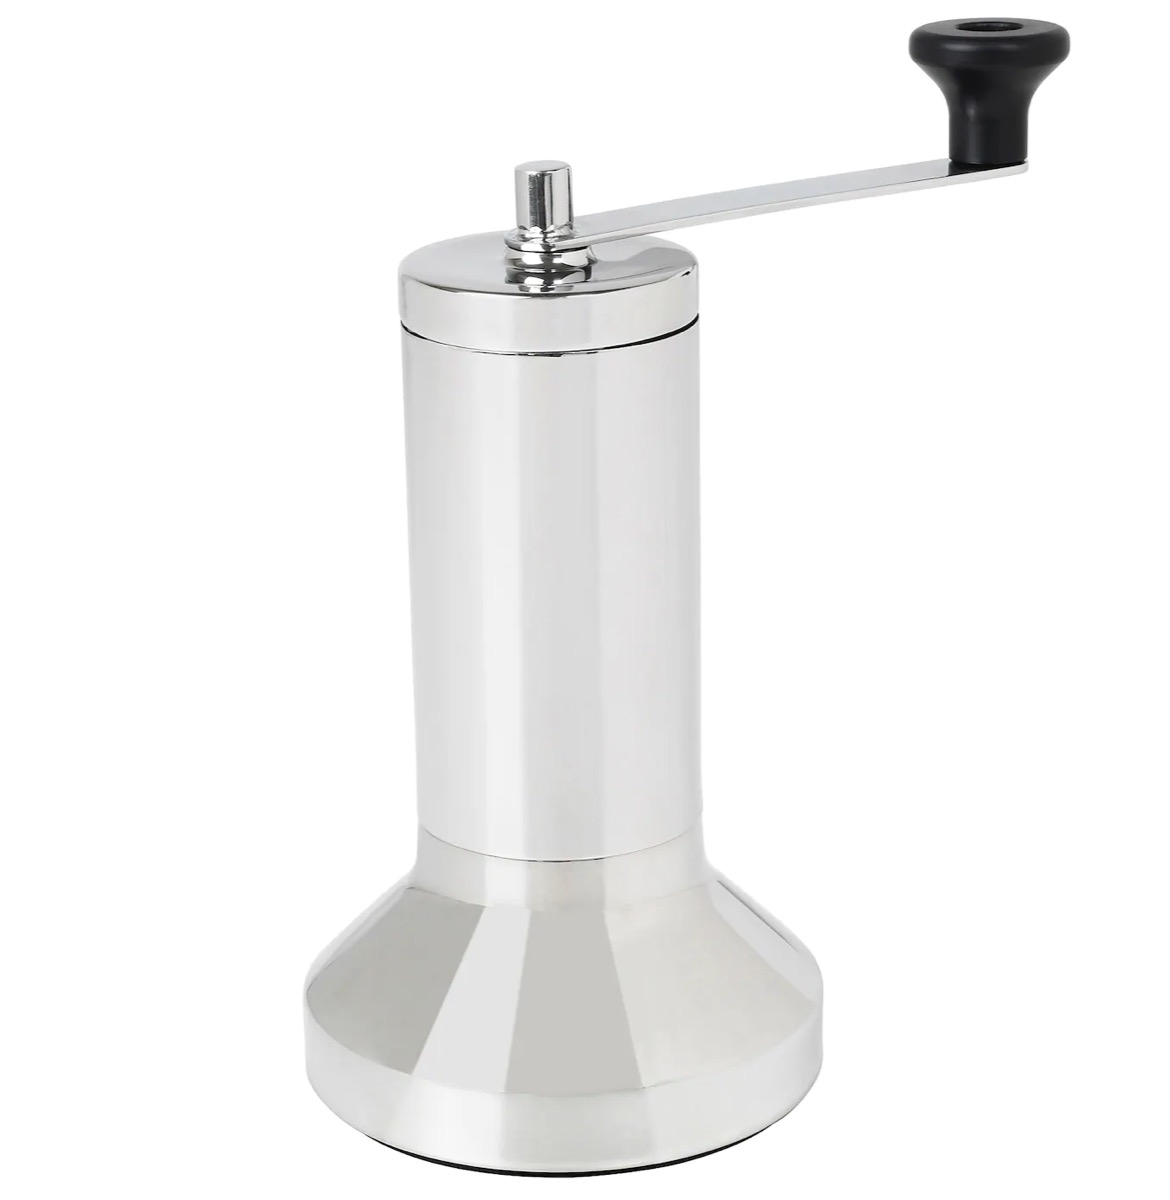 silver coffee grinder with hand crank